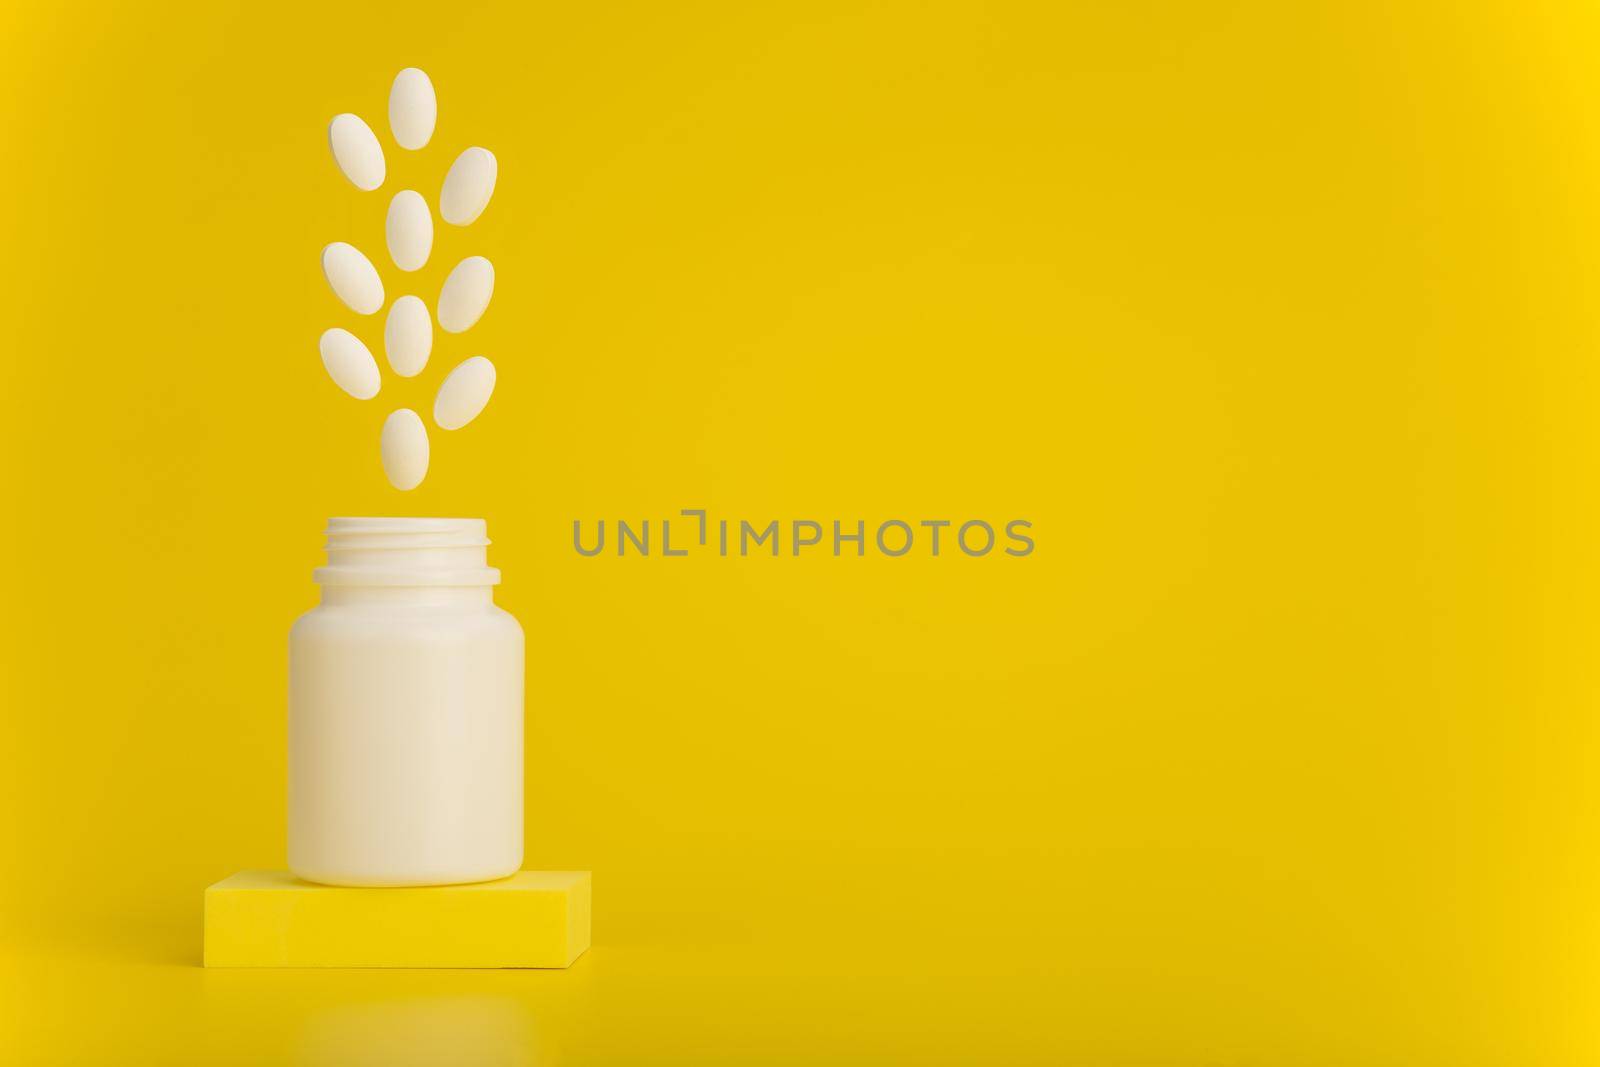 Still life with opened medication bottle on podium with white oval pills jumping out against yellow background with copy space. Concept of vitamins for kids or wellbeing and pharmacy